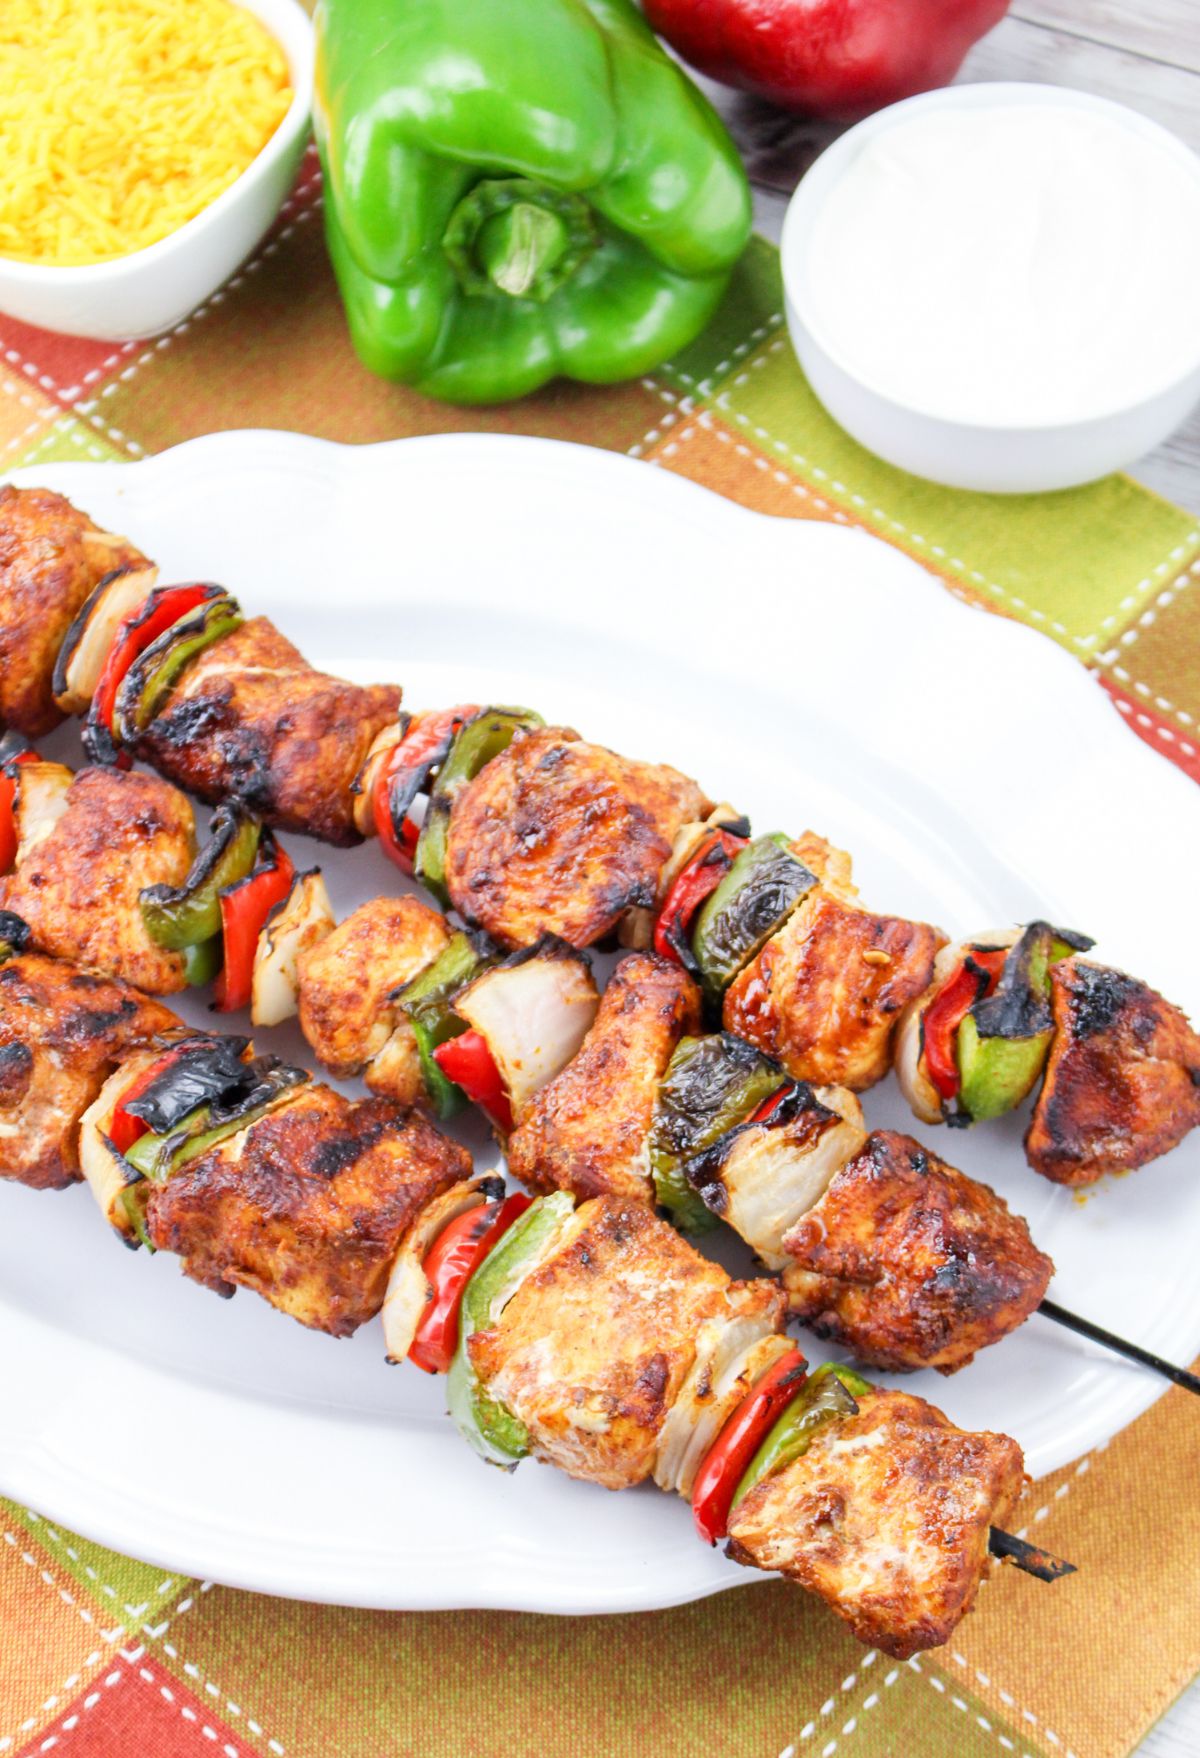 Grilled chicken skewers on a plate.